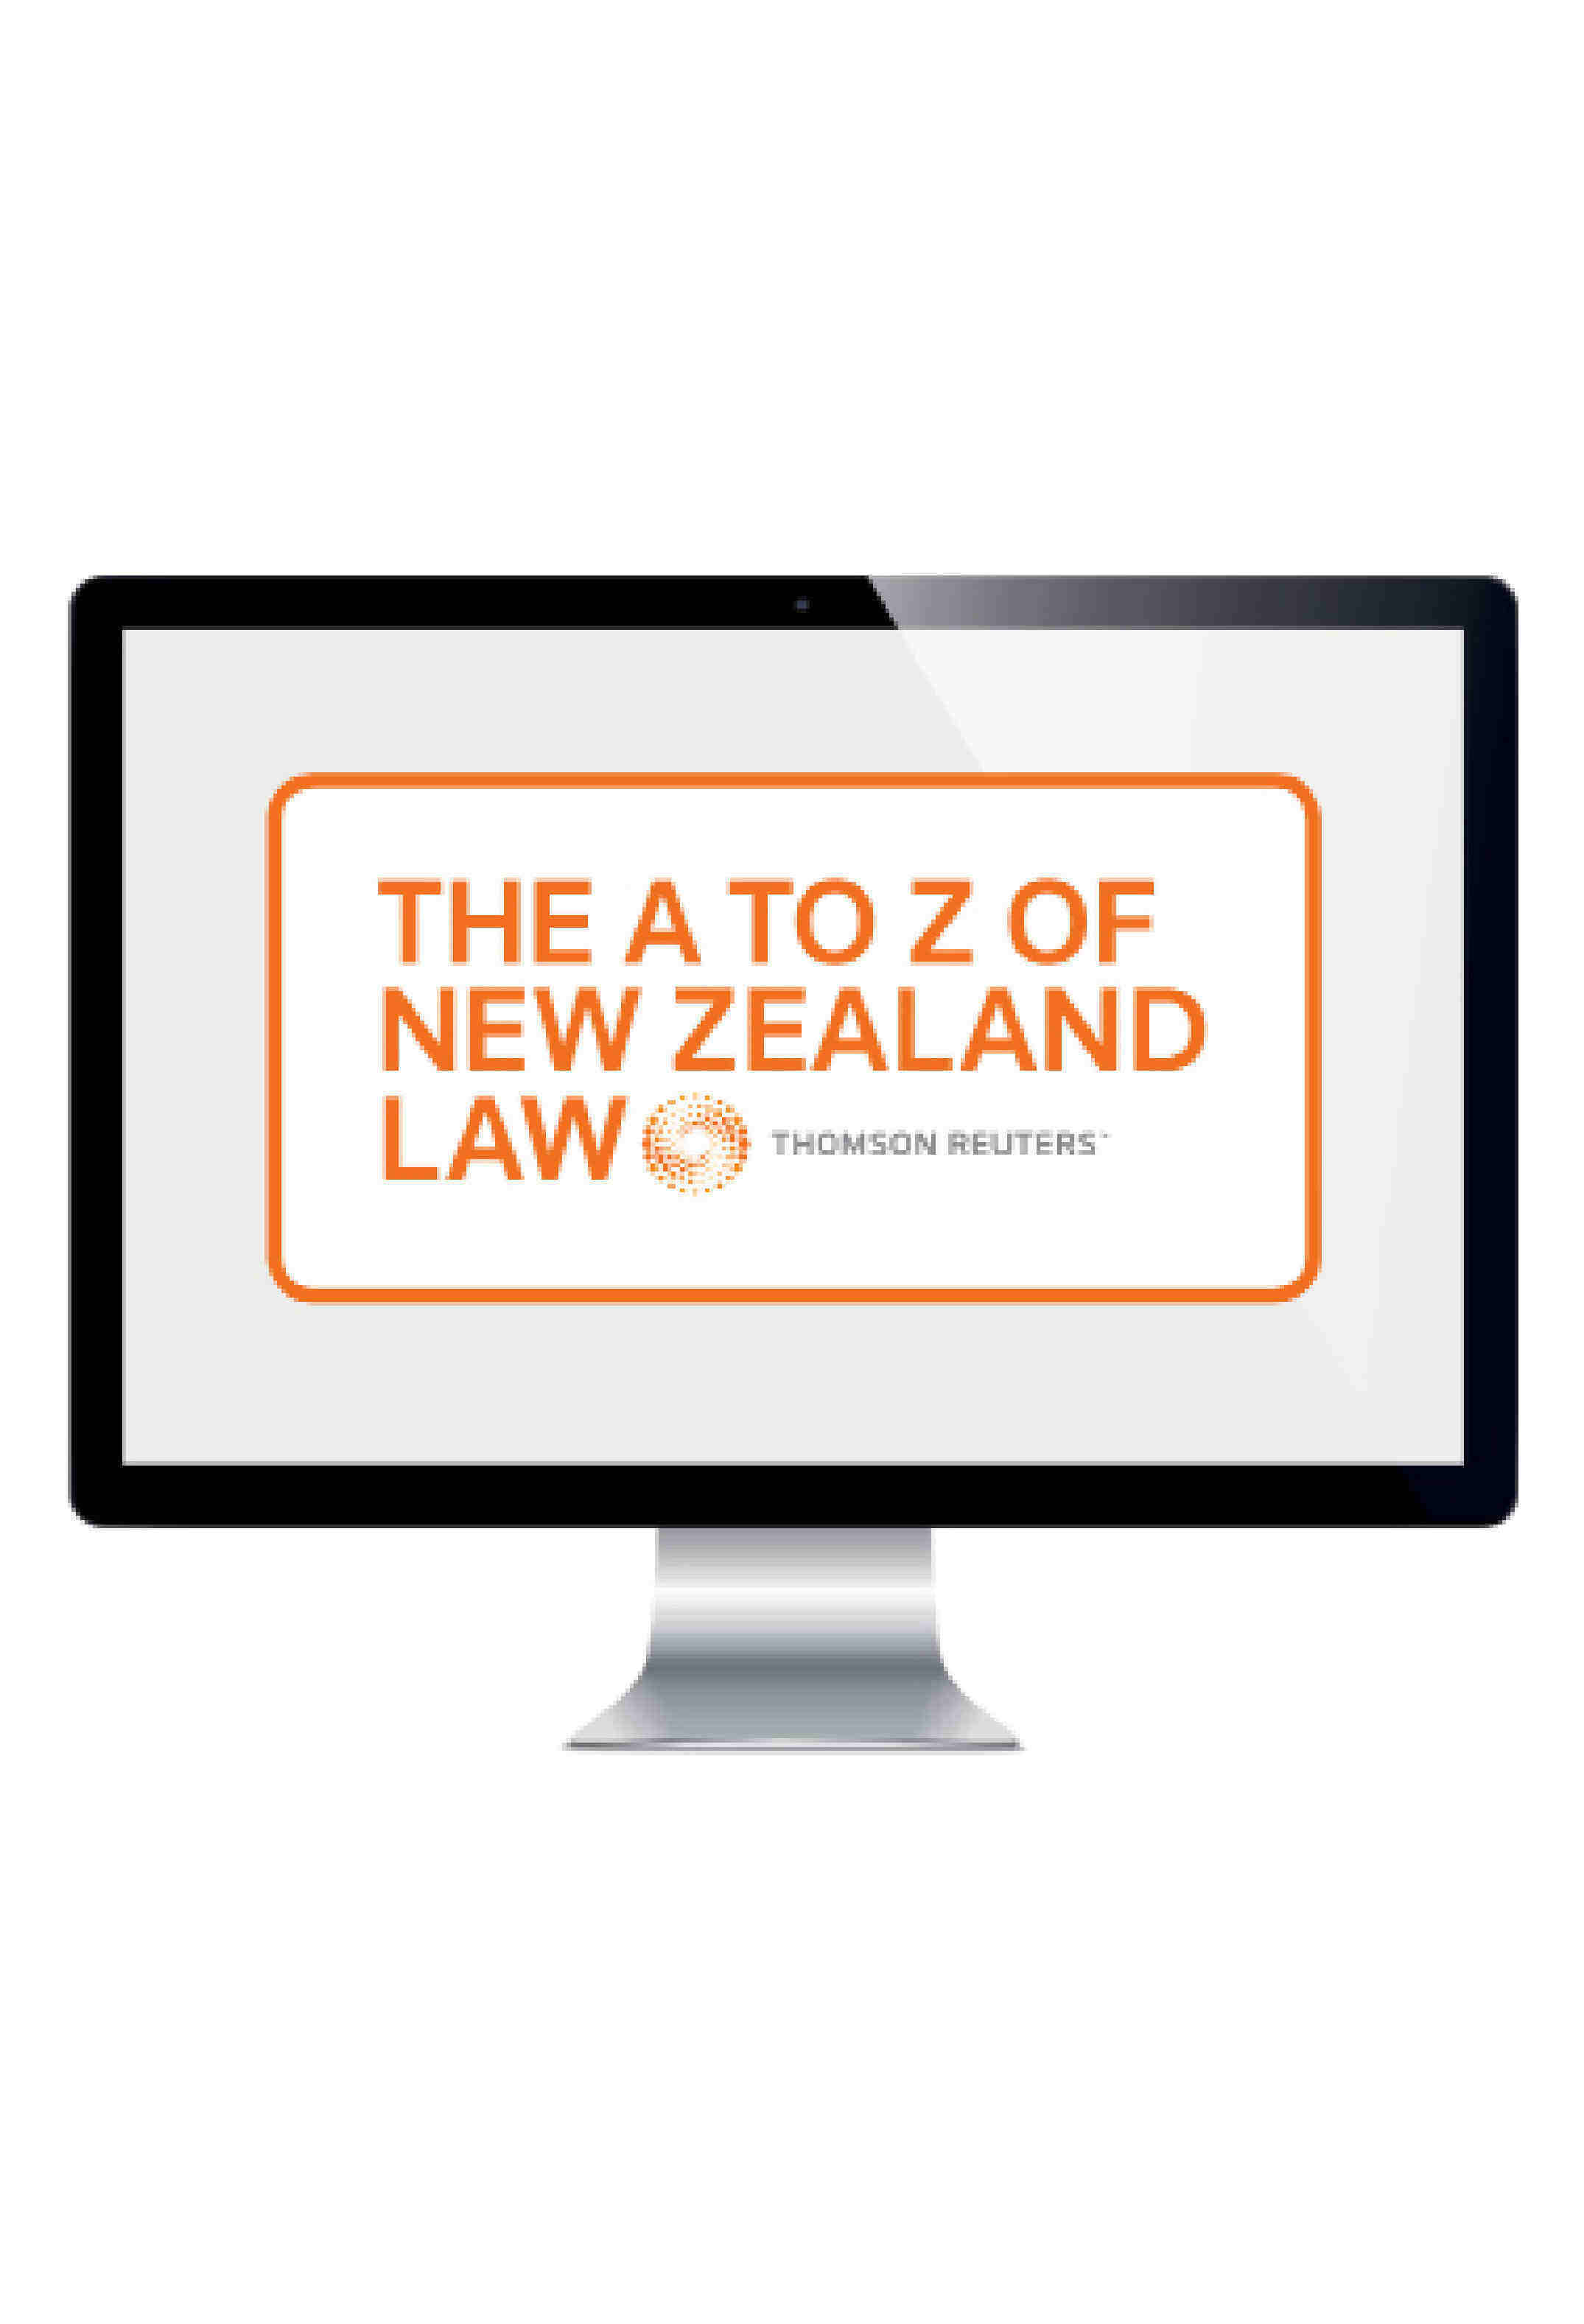 A to Z of NZ Law - Commercial Law, Securities - Westlaw NZ